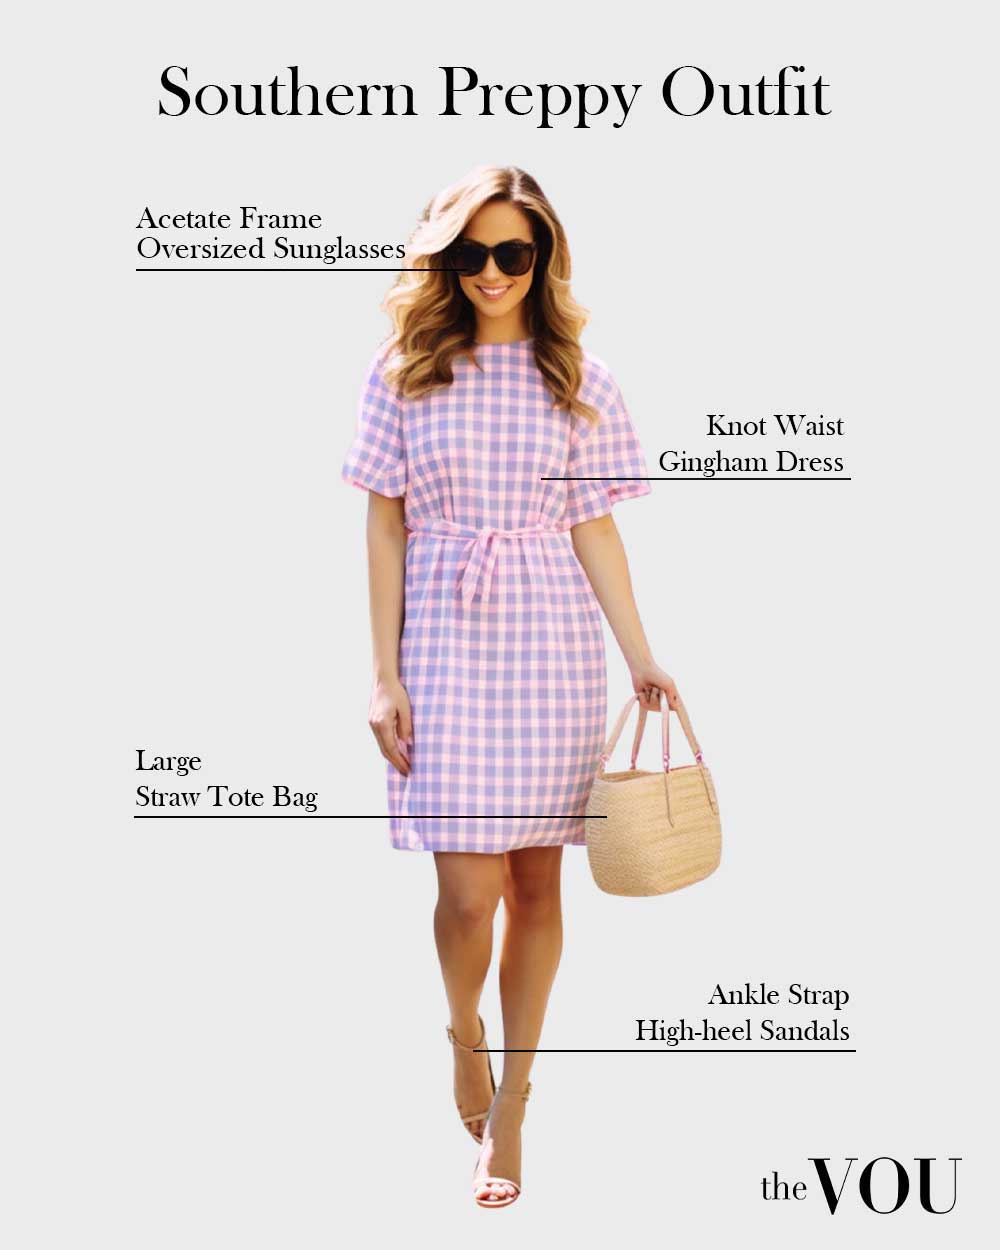 Southern Preppys Outfit: Acetate Frame Oversized Sunglasses, Knot Waist Gingham Dress, Large Straw Tote Bag, Ankle Strap High-heel Sandals